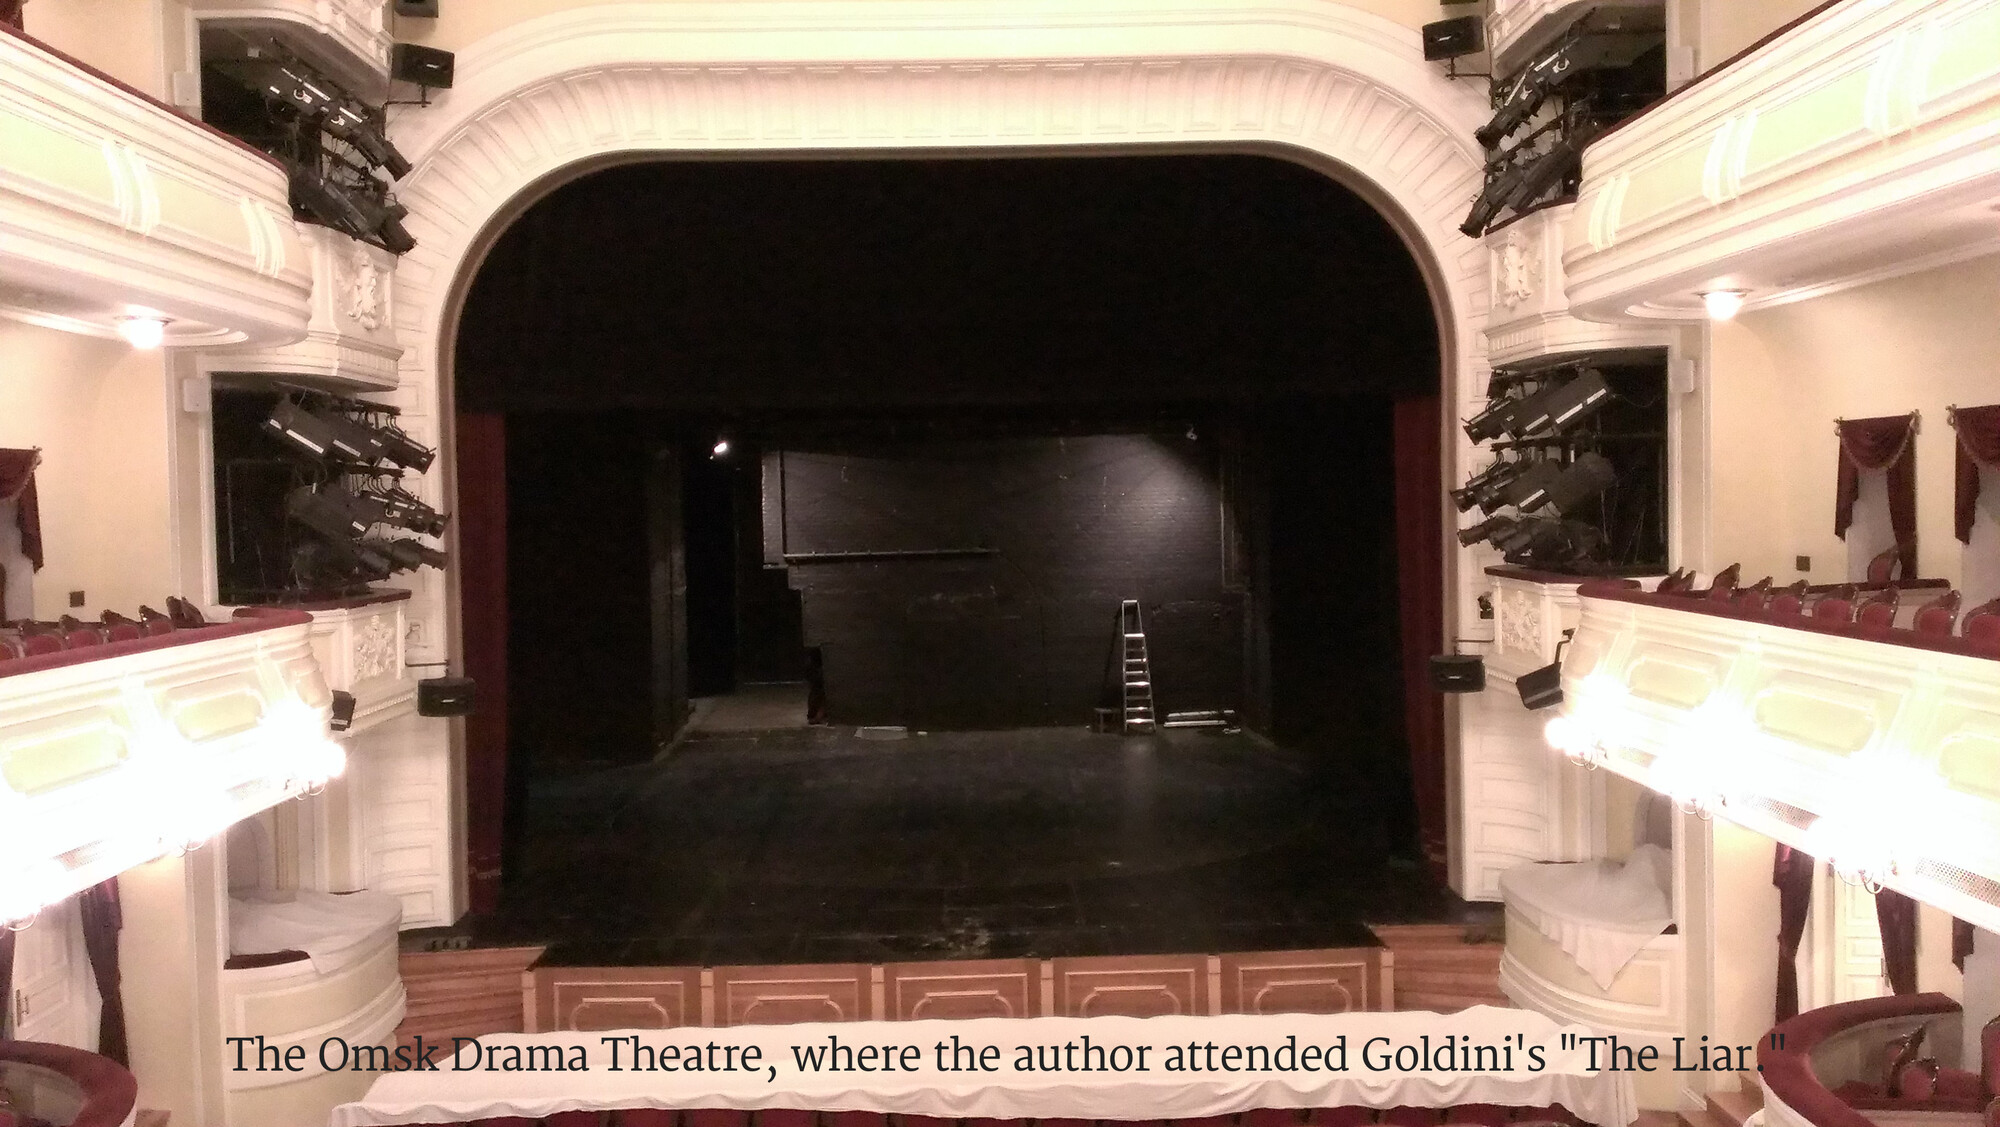 The interior of the Omsk Drama Theatre as seen from the audience's perspective.